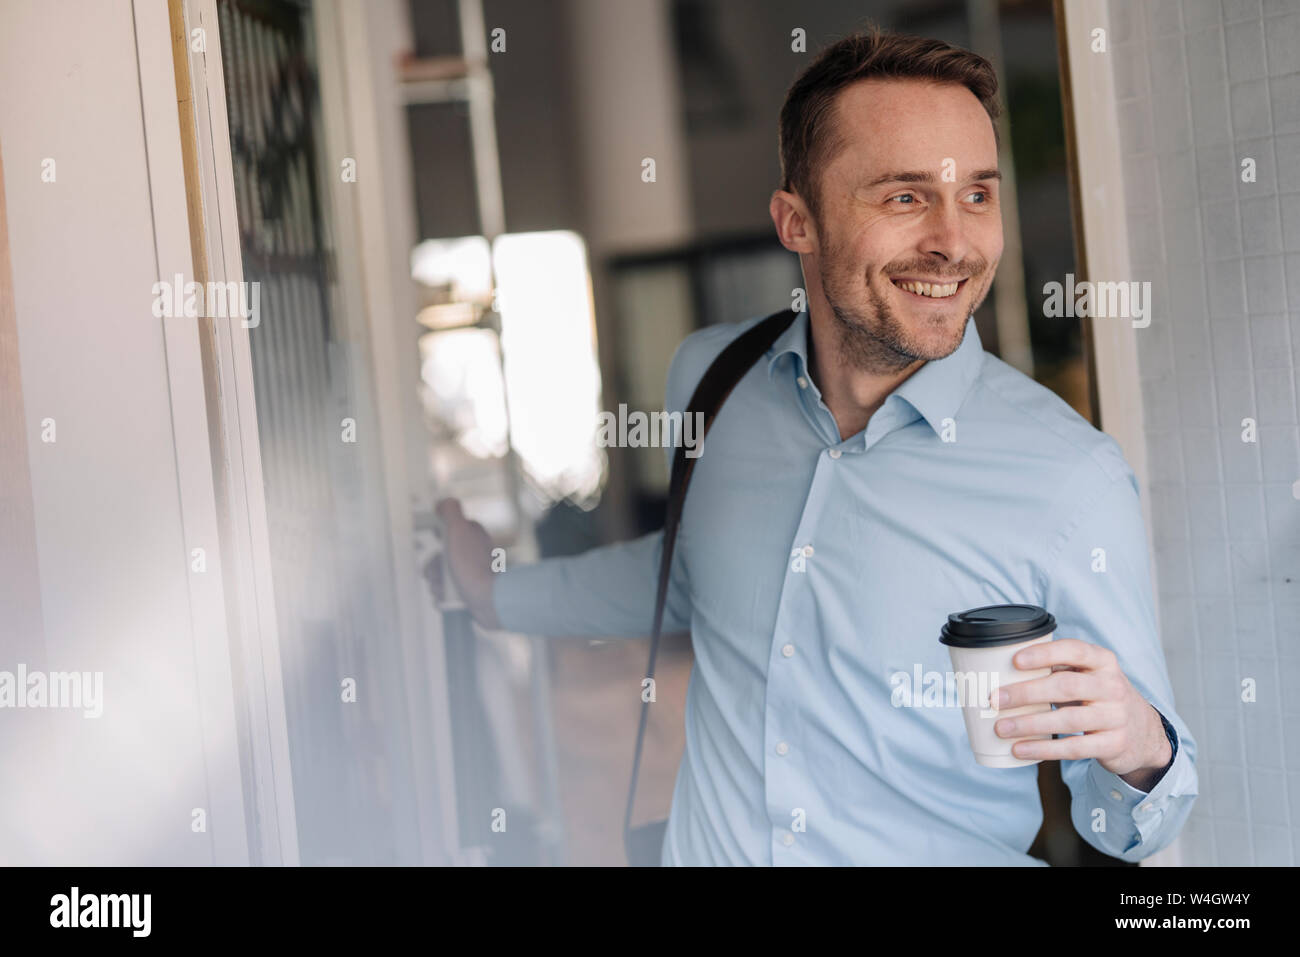 Businessman leaving coffee shope with take out coffee Stock Photo